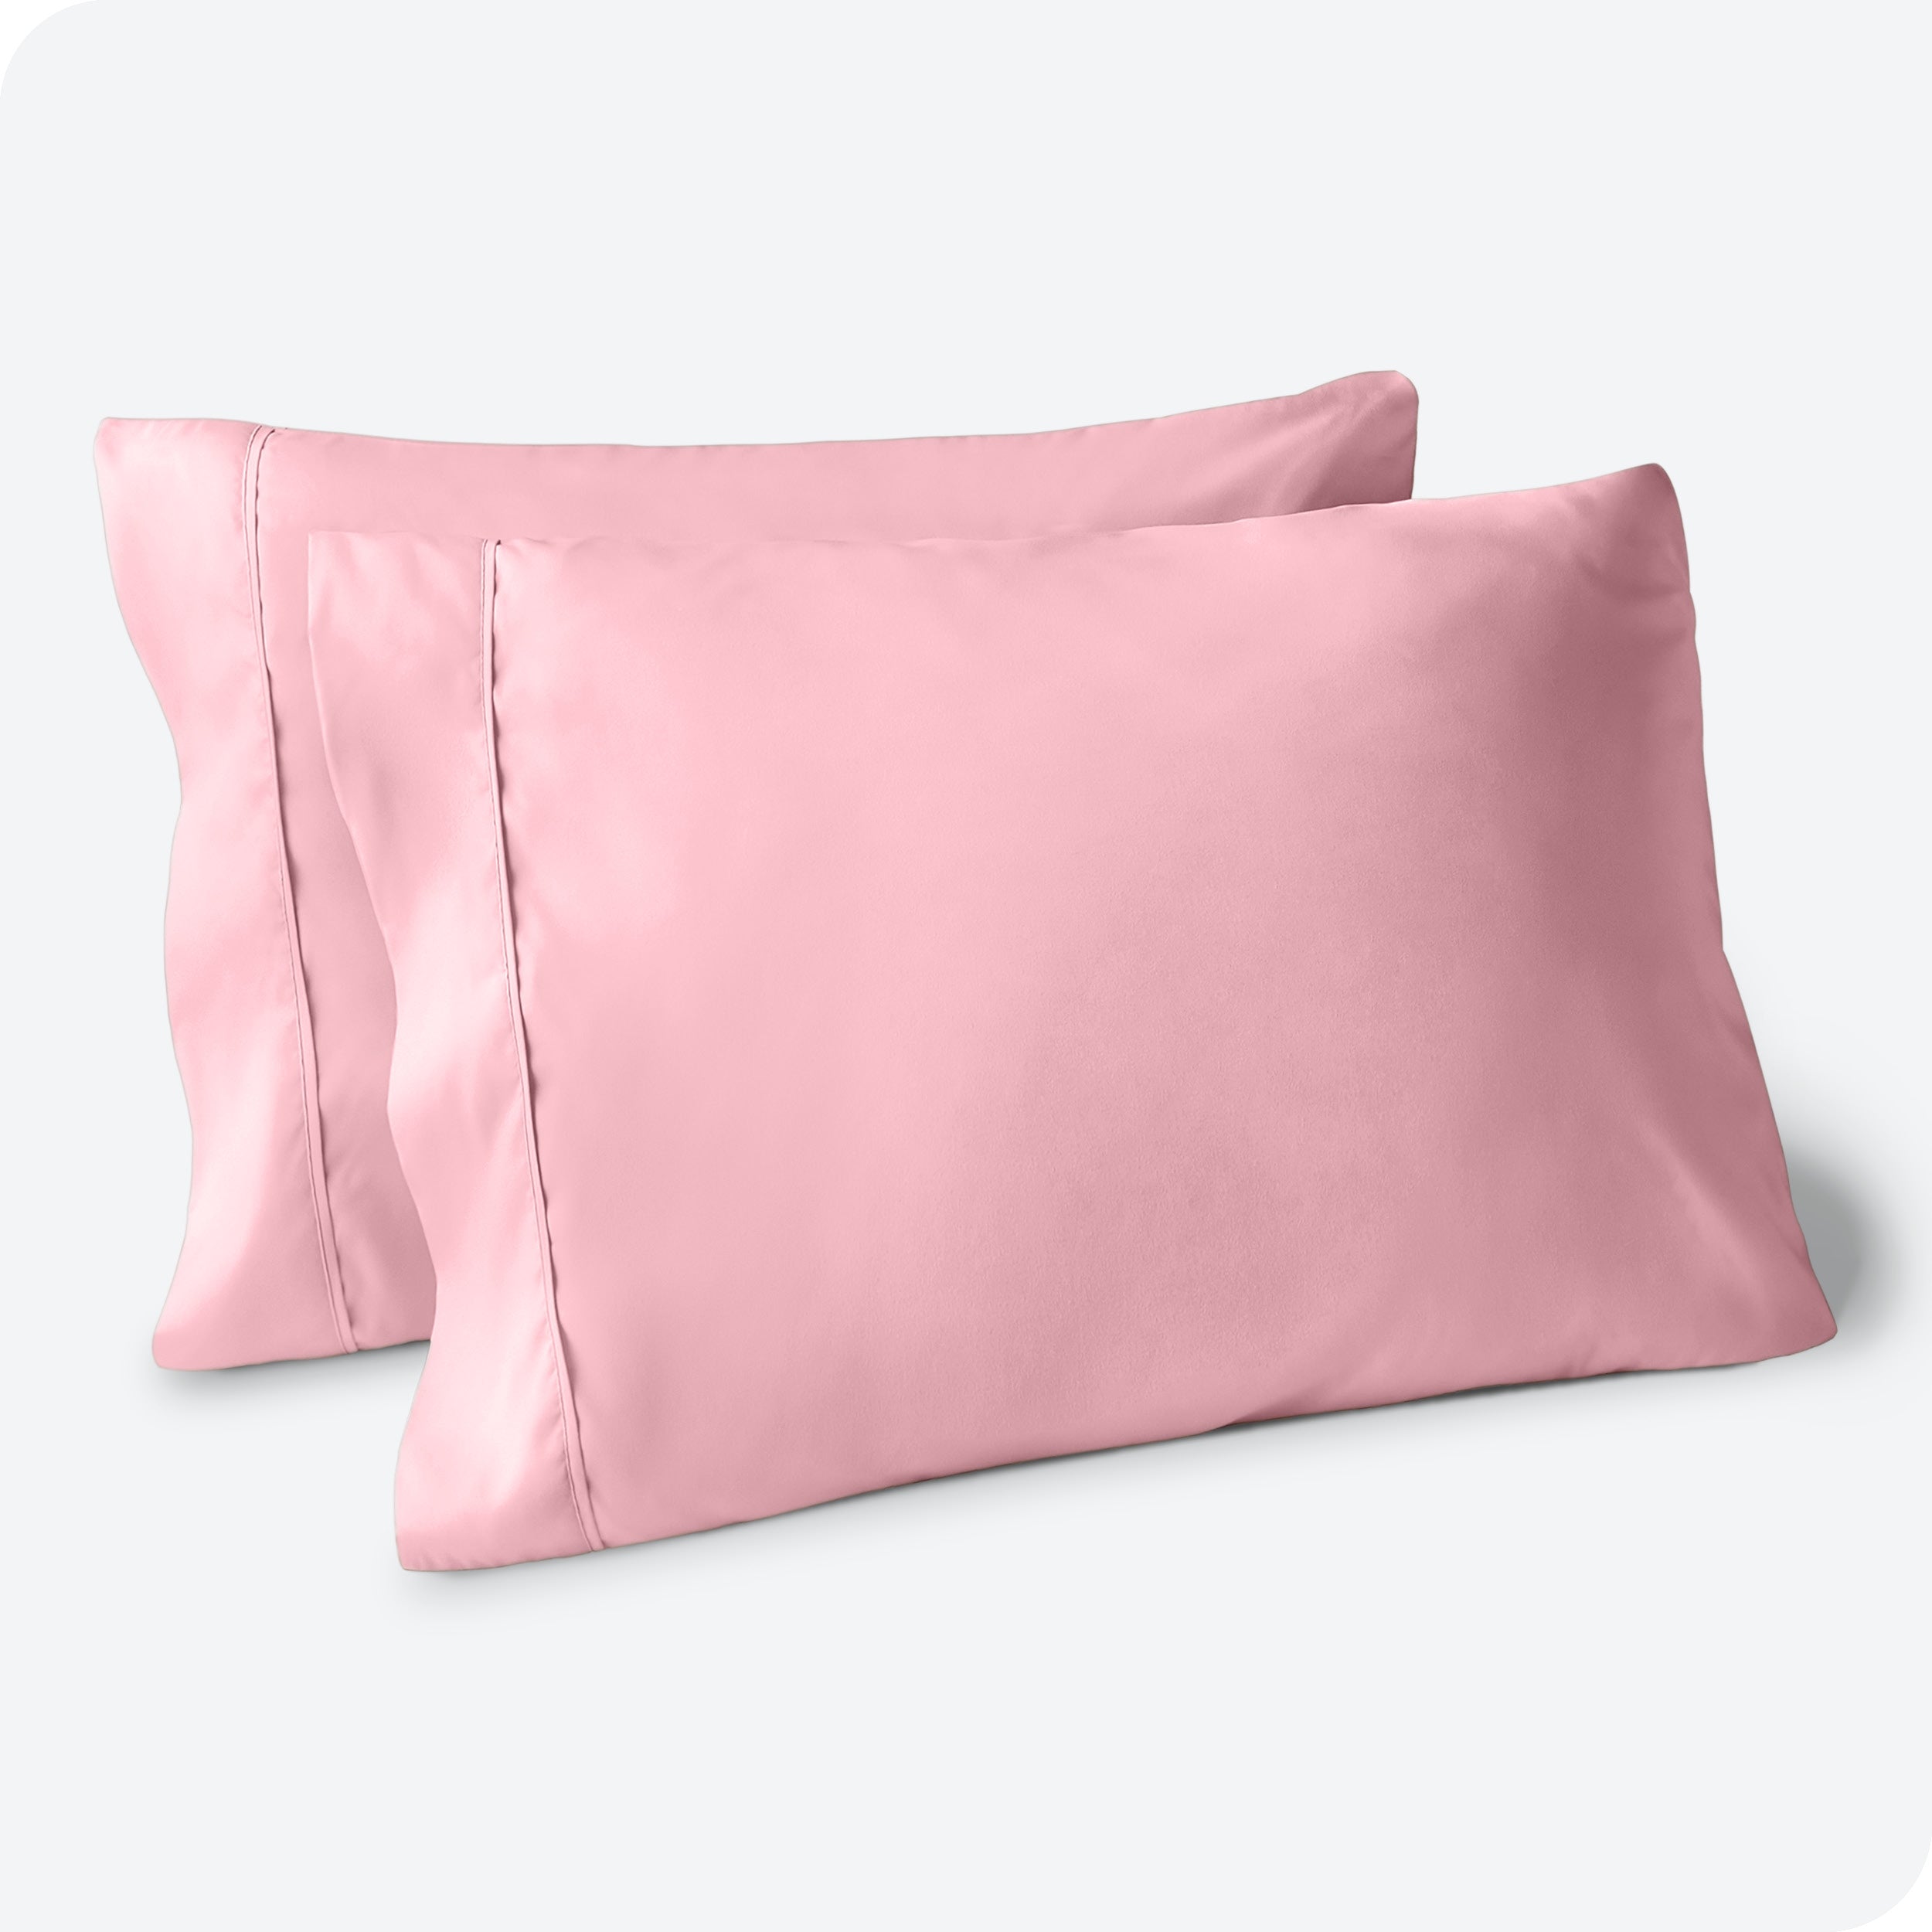 Two pillows on a white background with pink pillowcases on them